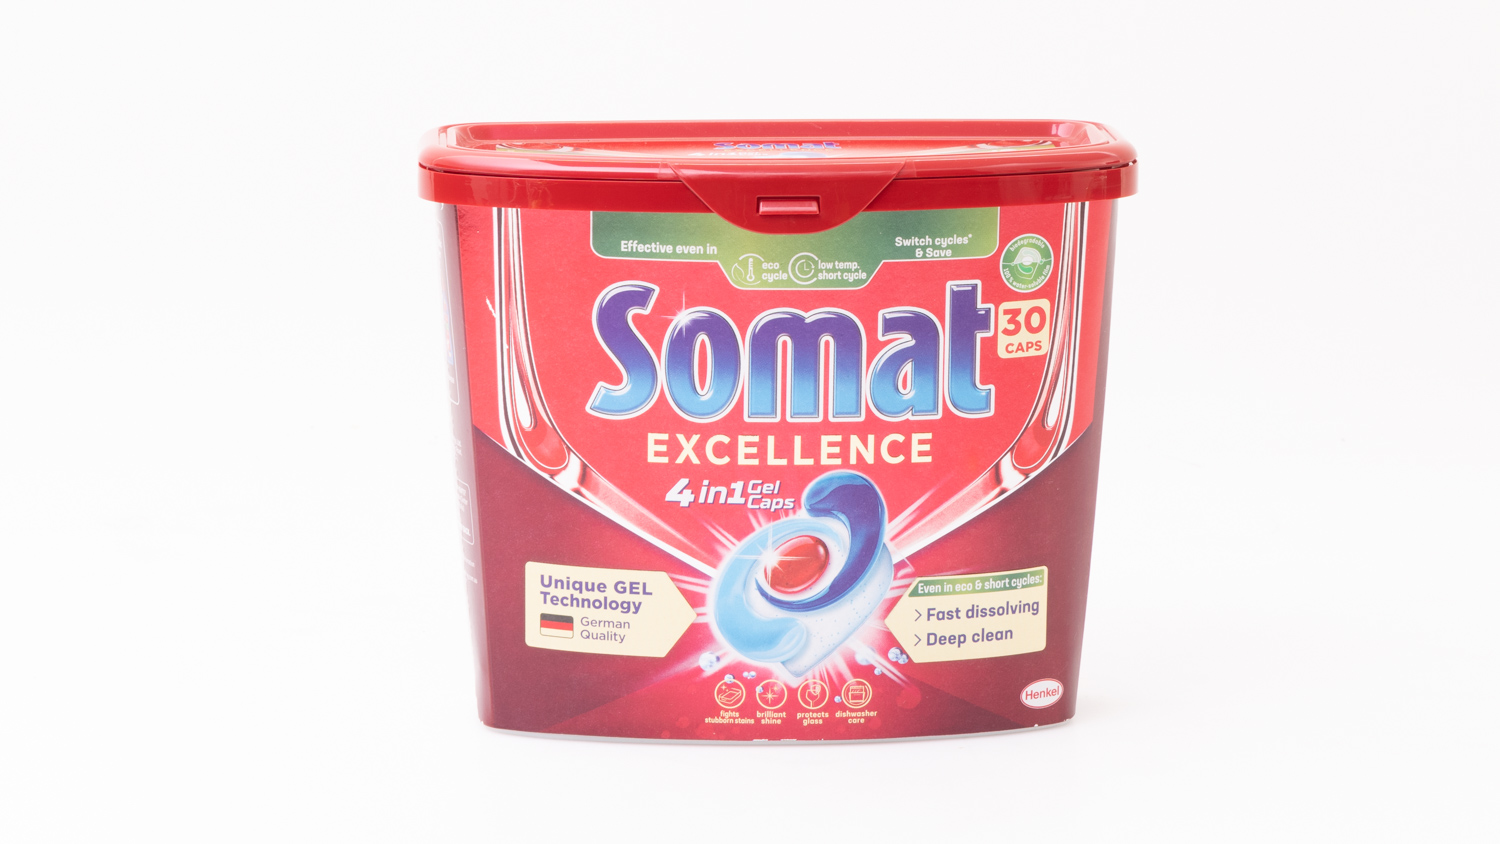 Somat Excellence 4in1 Gel Caps carousel image